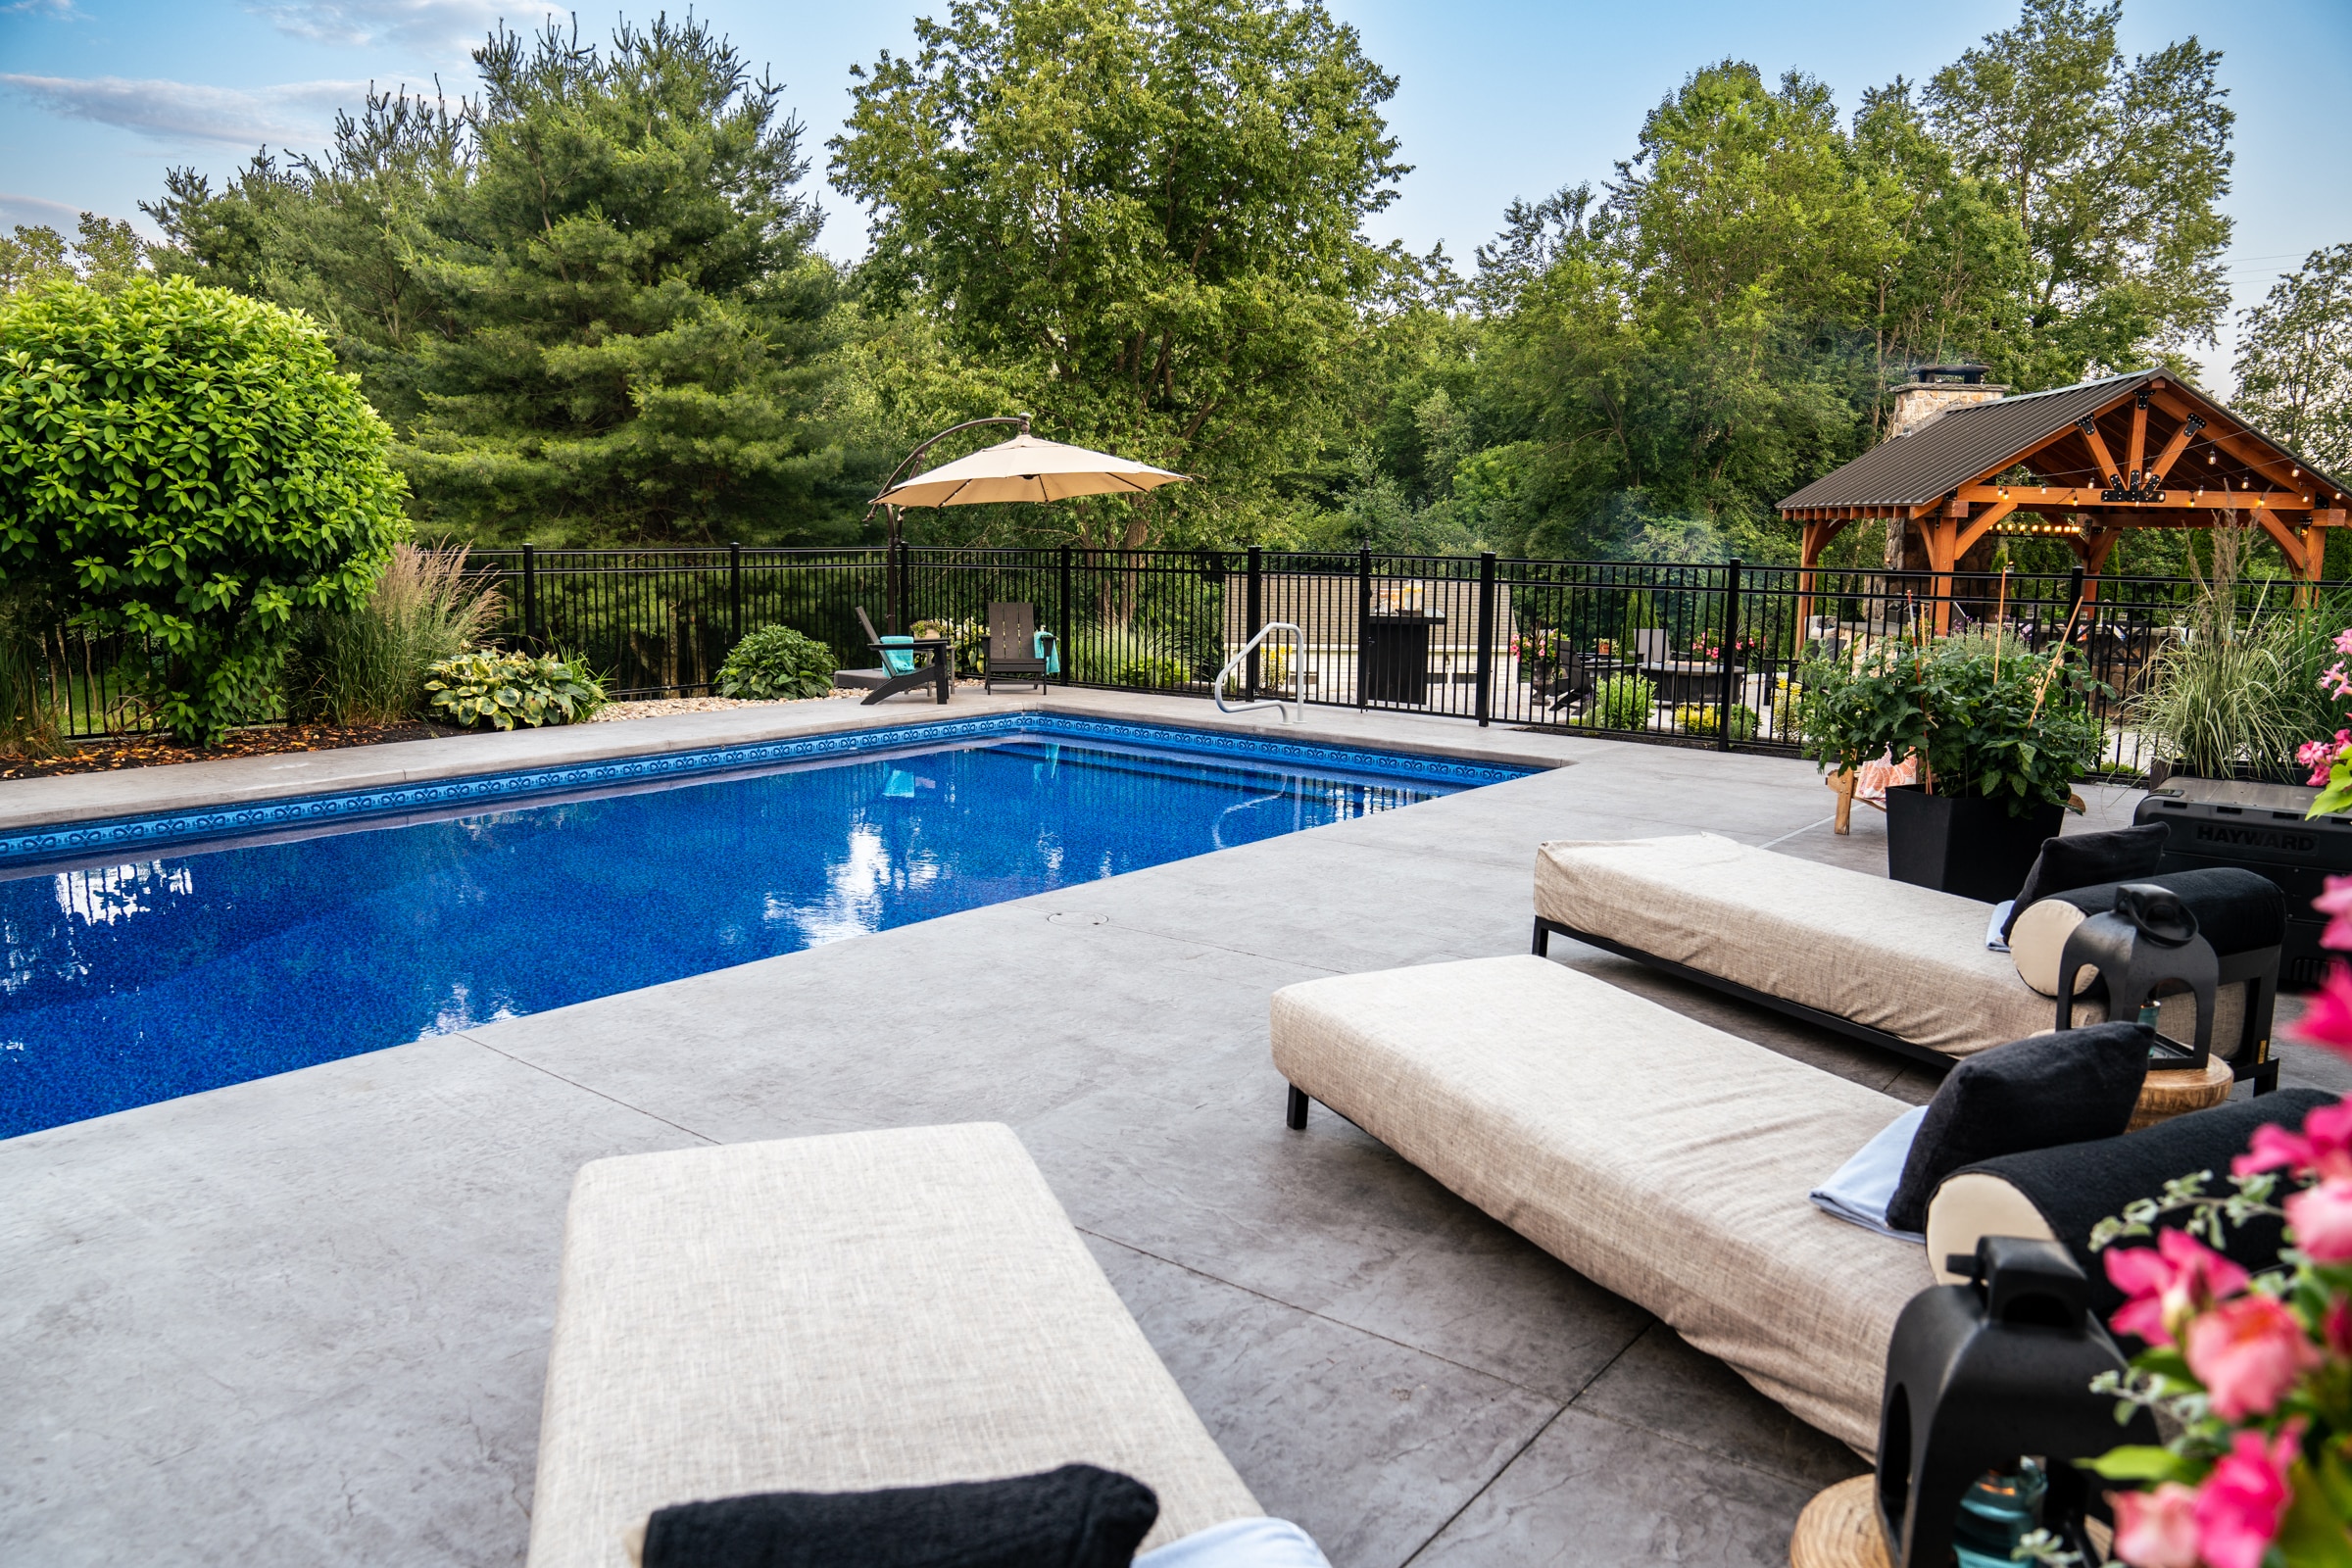 Poolside lounge chairs adorn the large seamless stamped concrete pool deck and are the perfect place to relax.